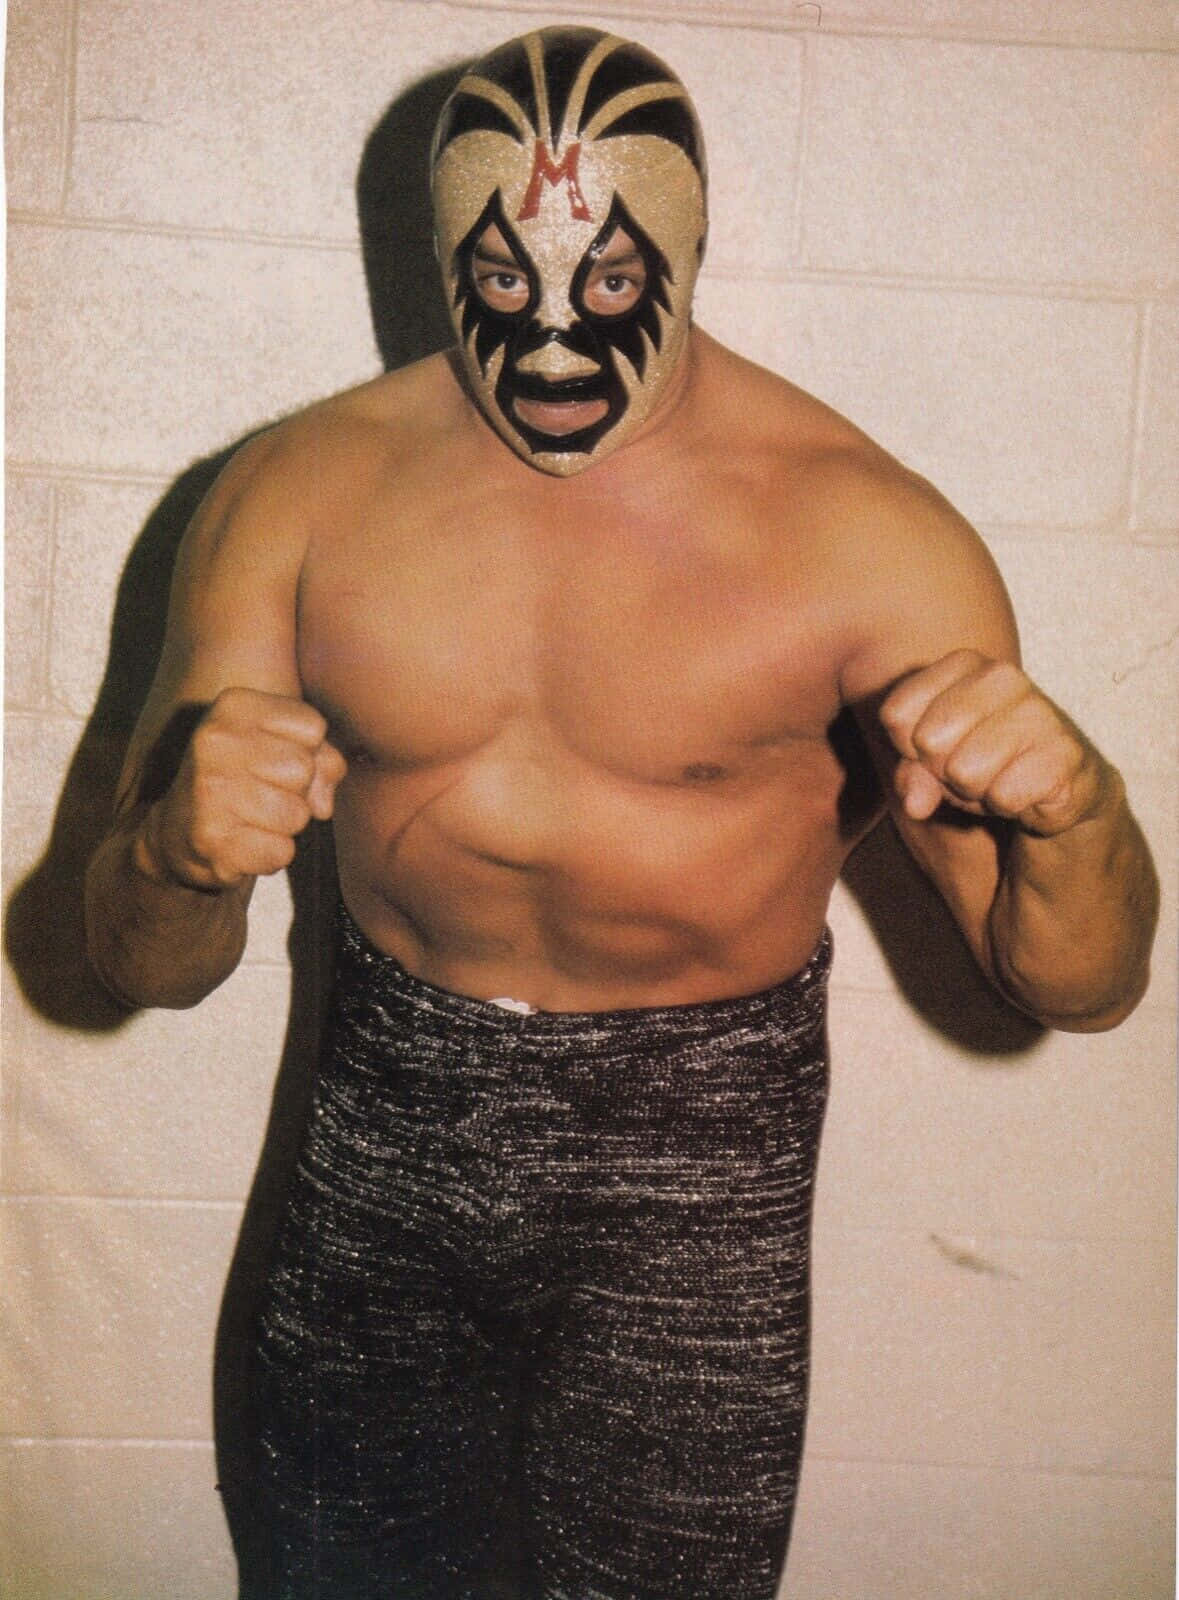 Mil Mascaras With Fist Pump Wallpaper